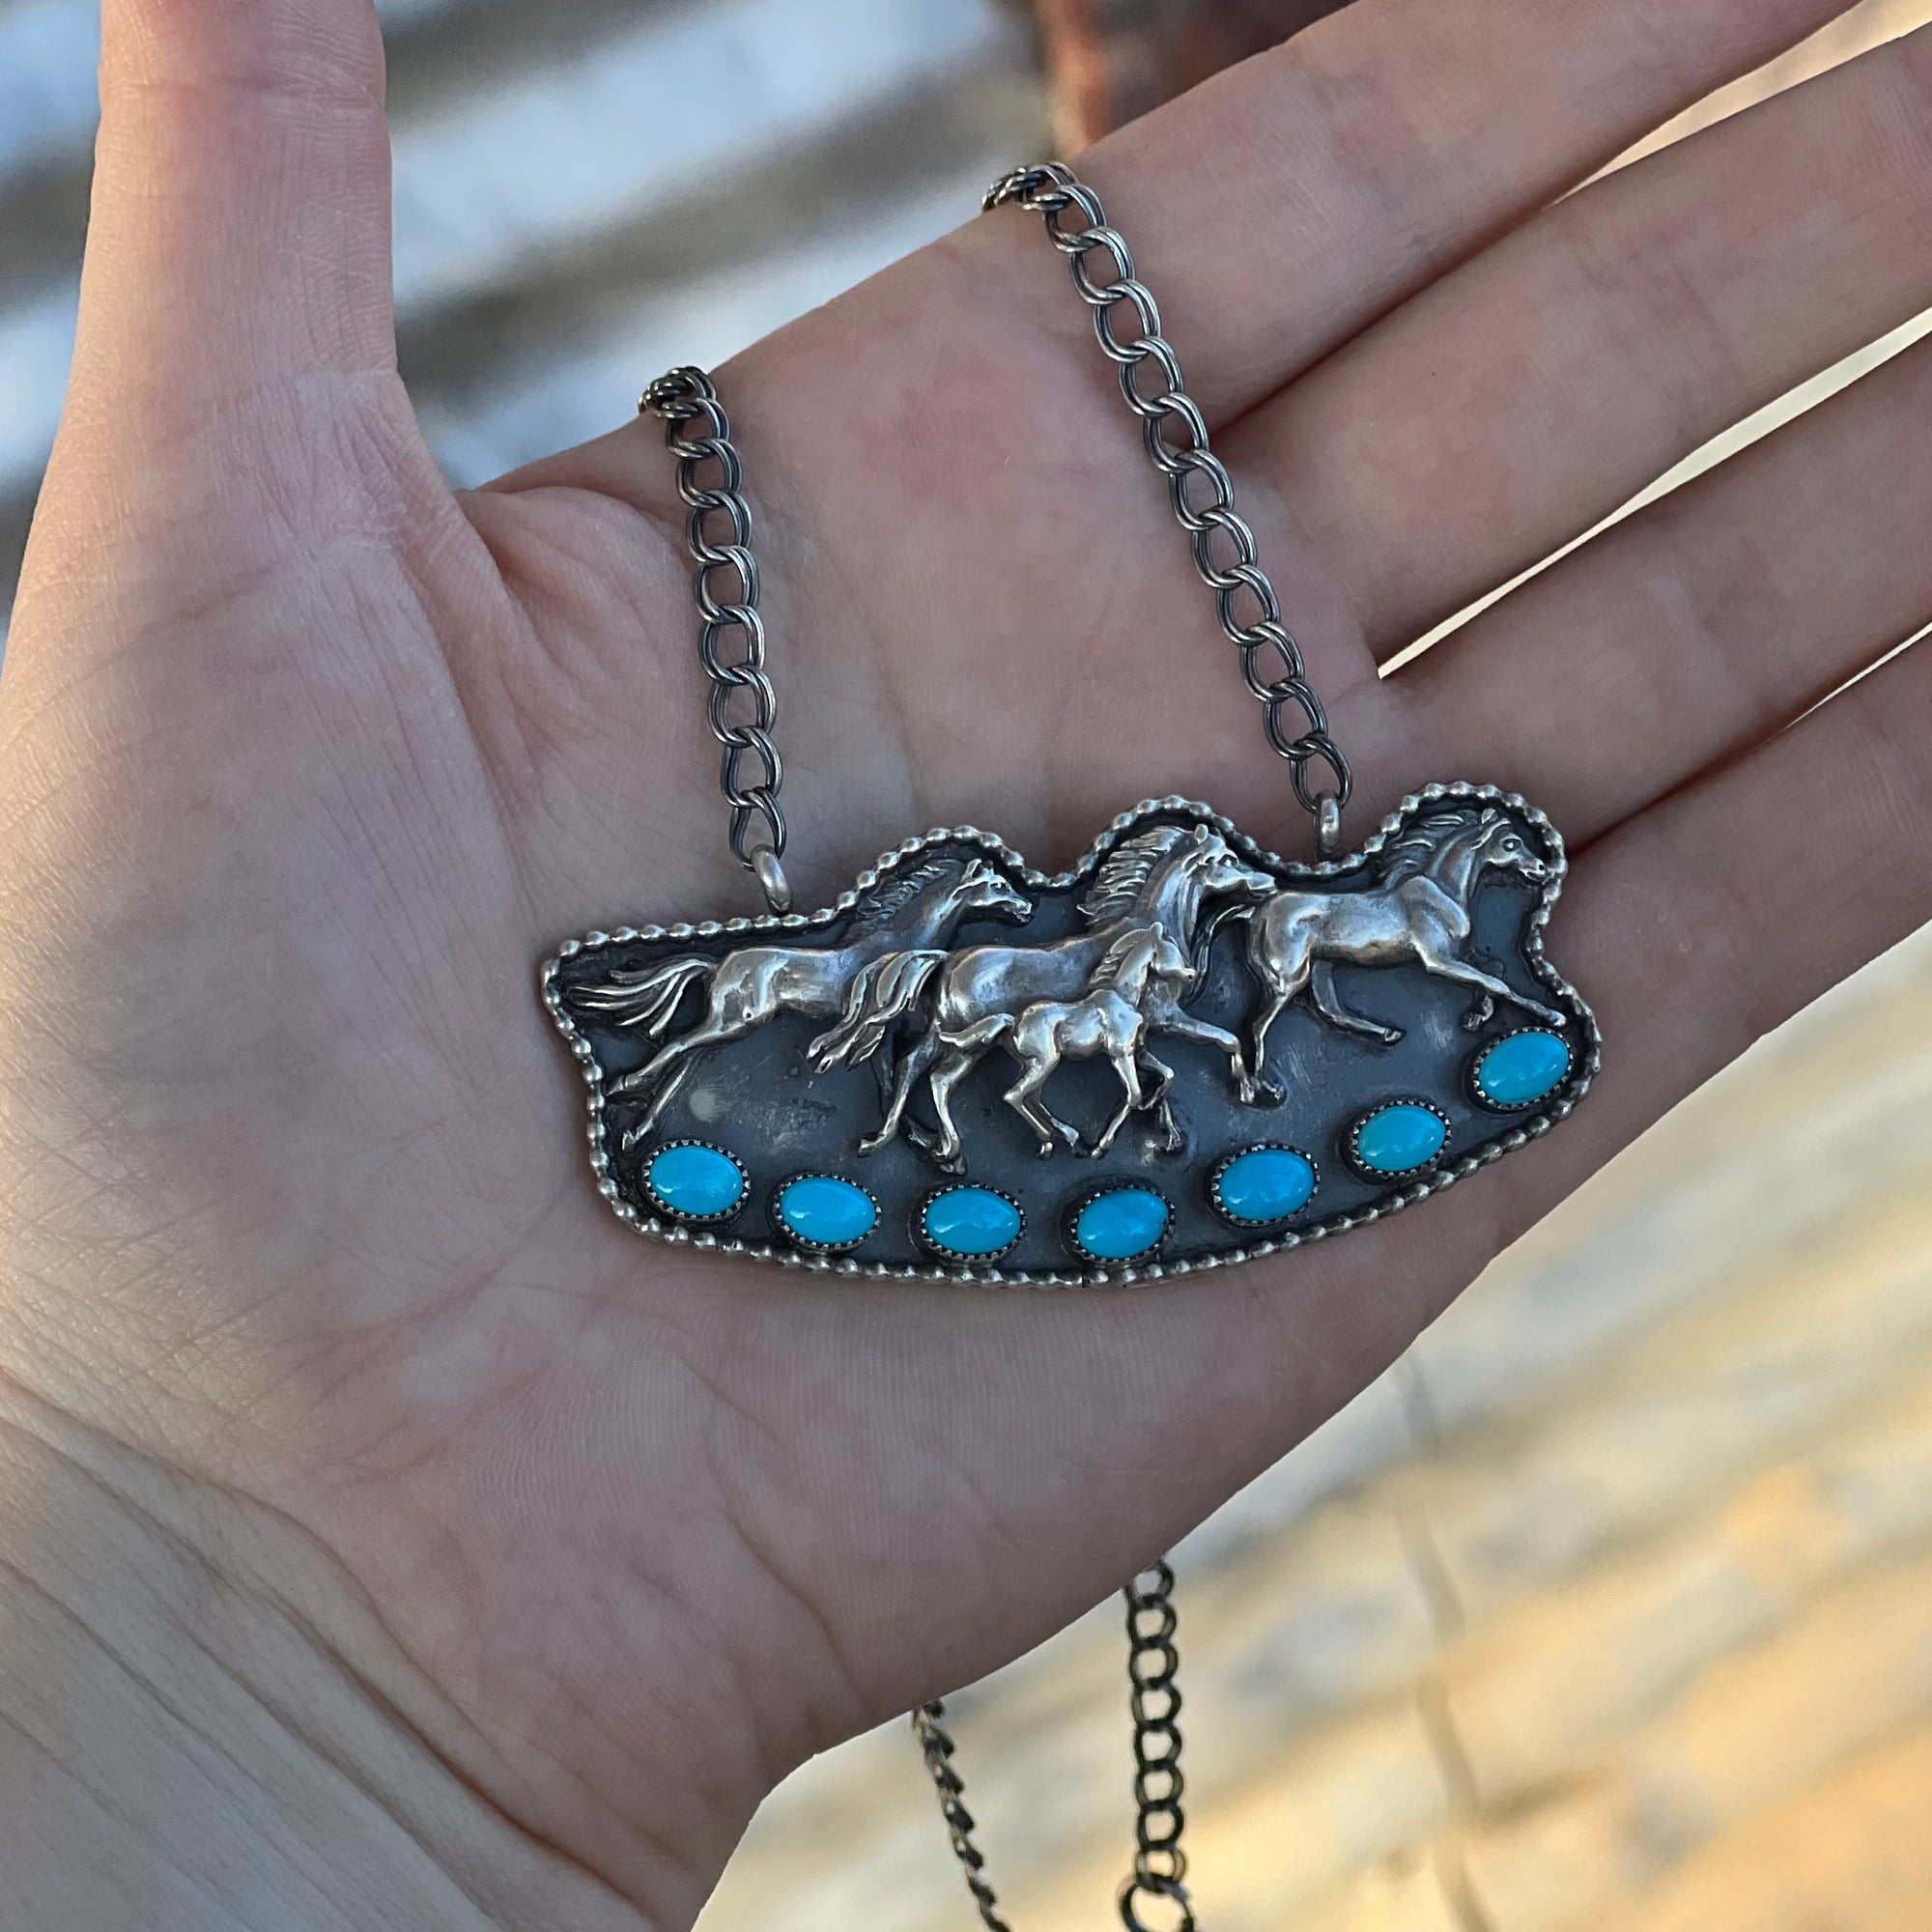 Running Horse Necklace